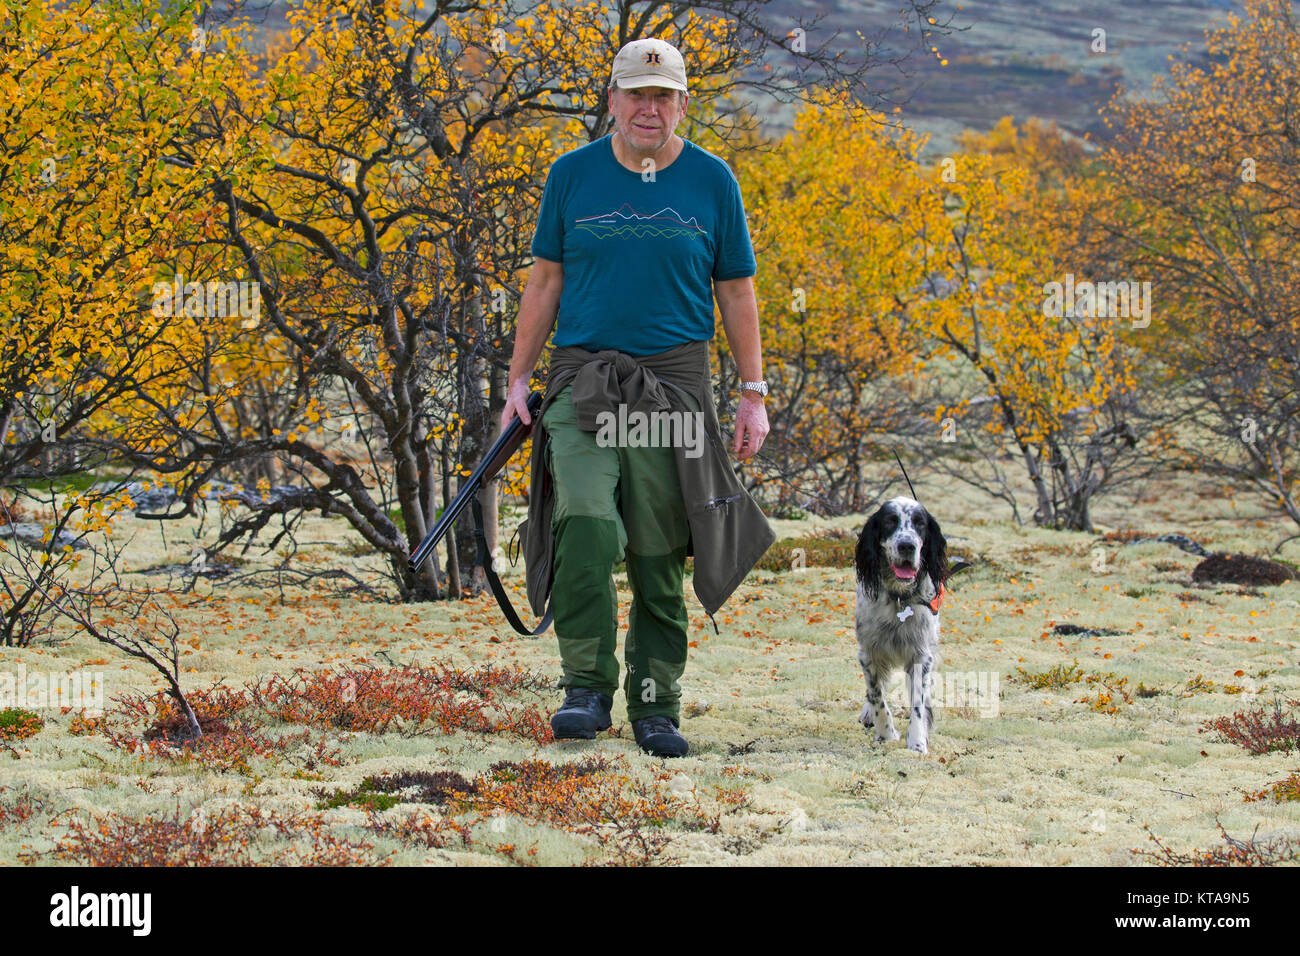 Norwegian hunter with shotgun and English Setter dog hunting grouse on moorland in autumn, Norway Stock Photo